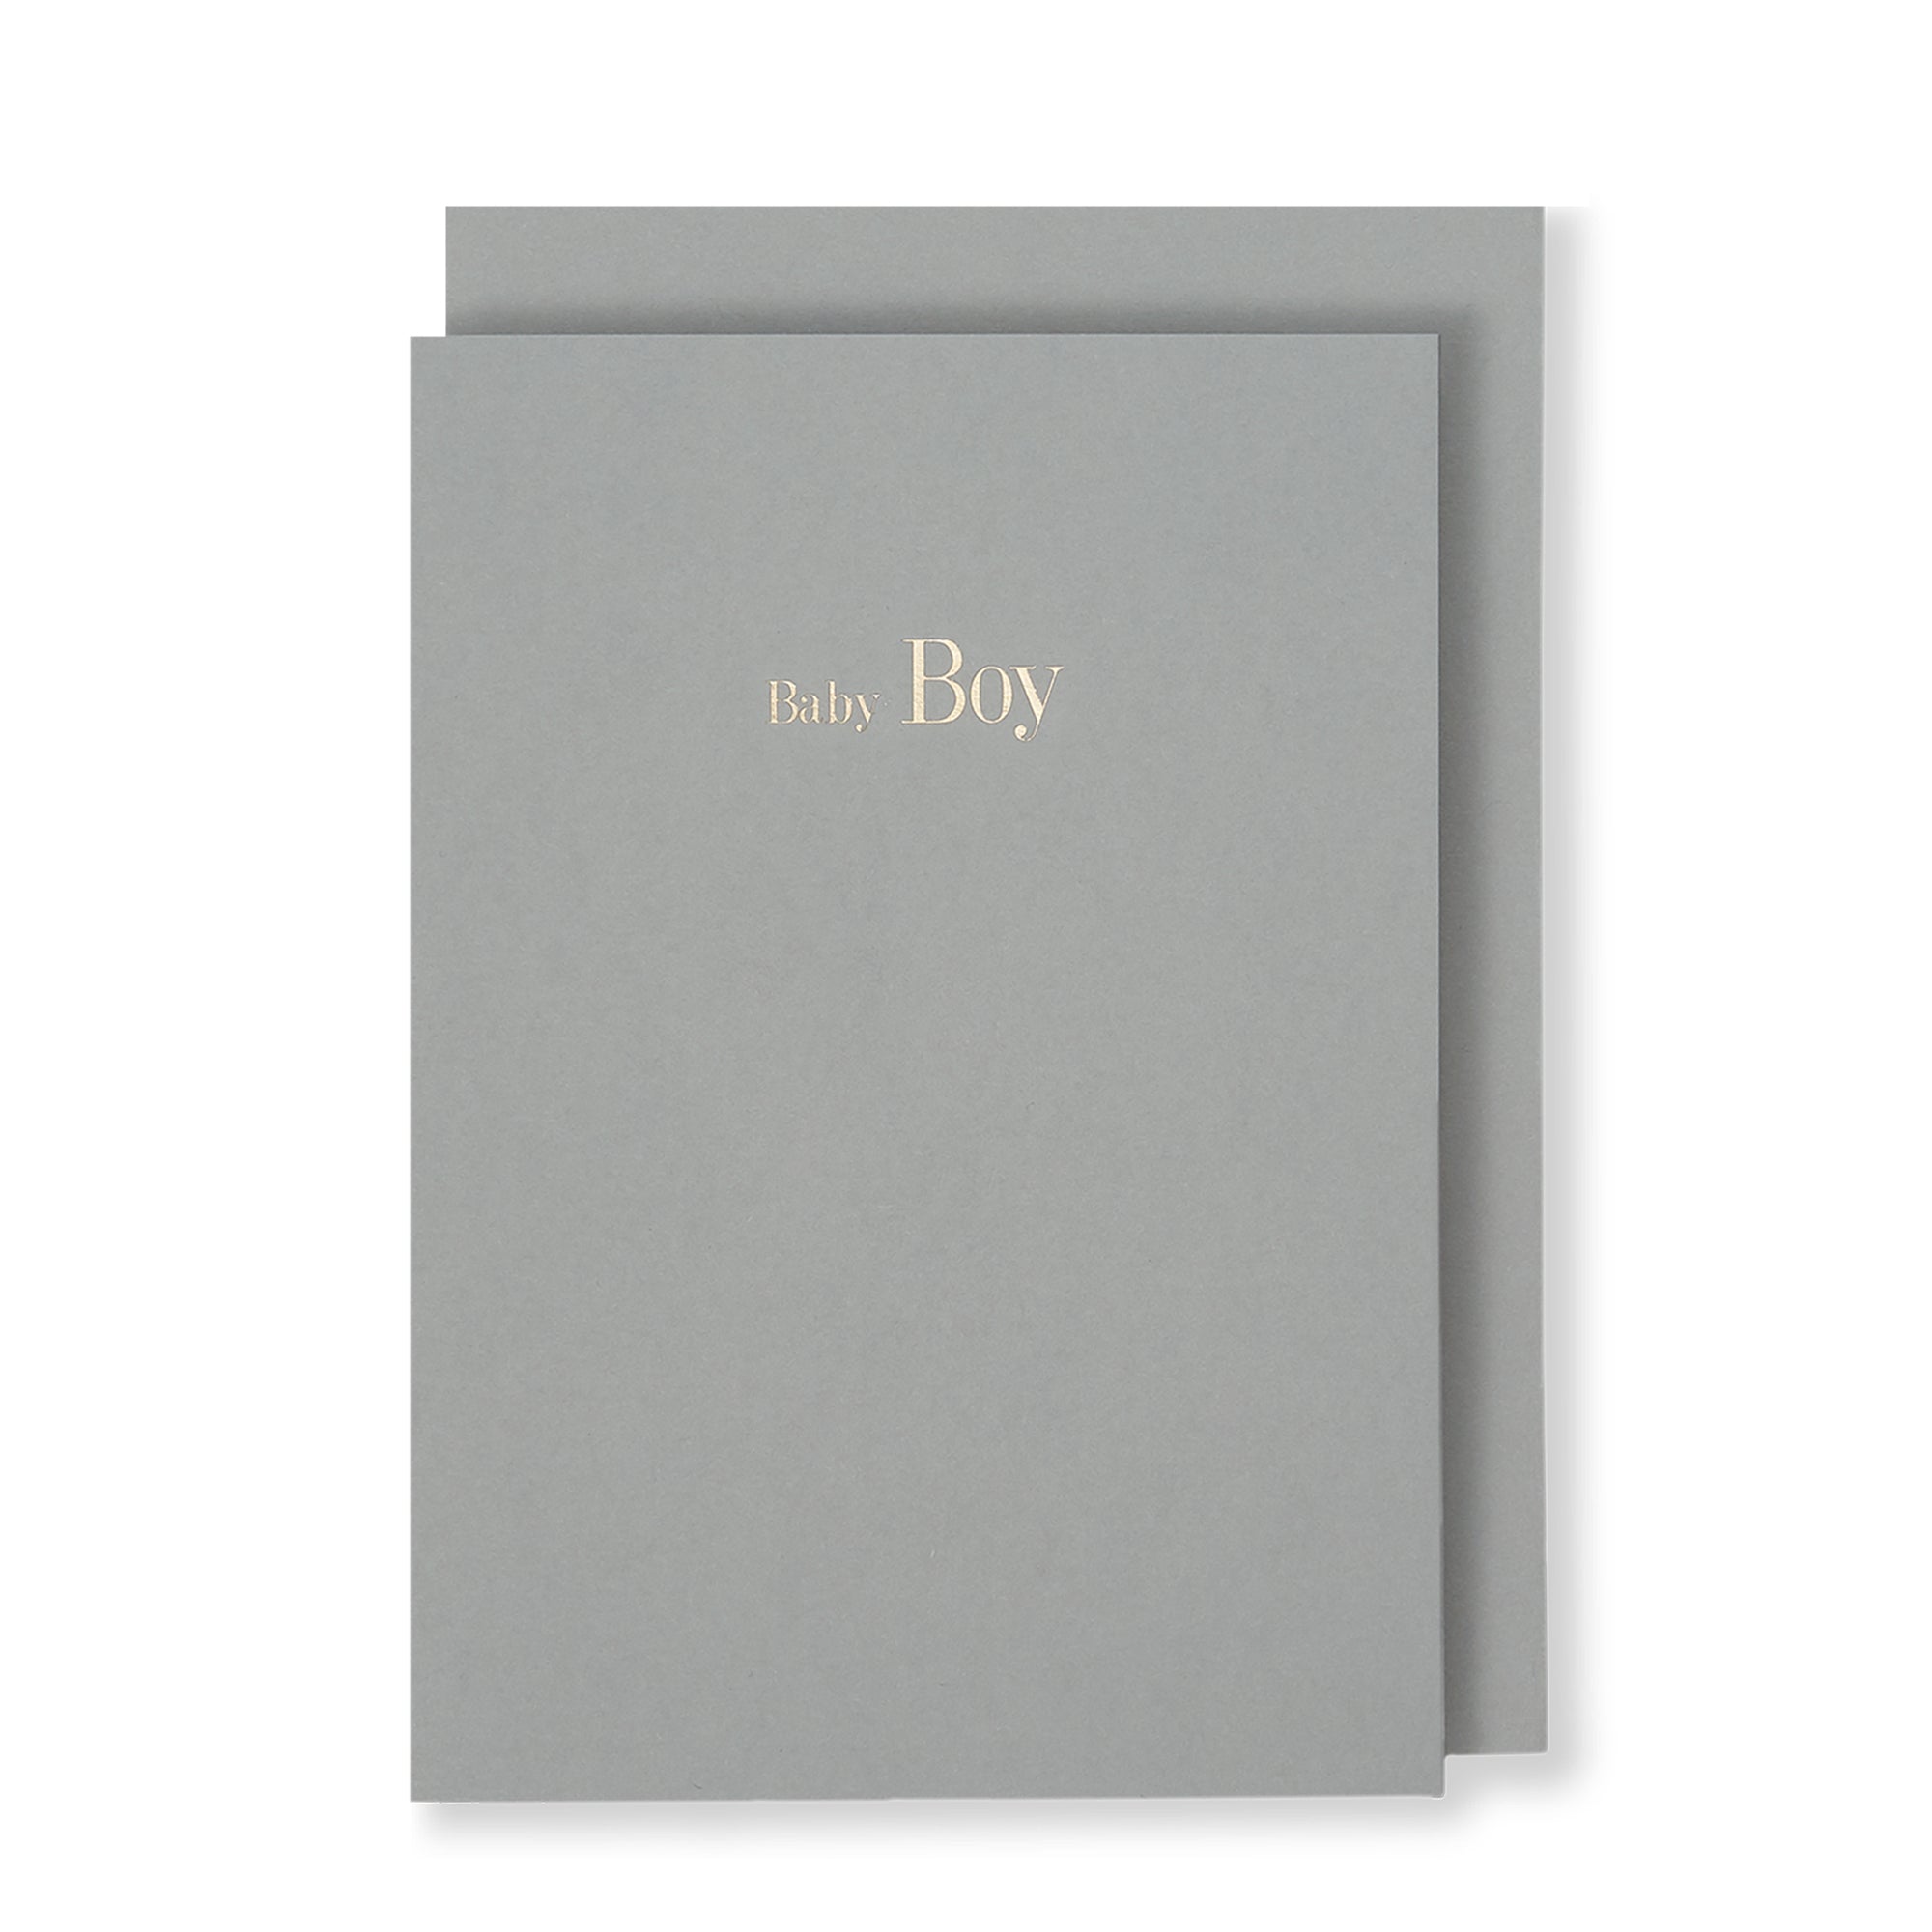 Baby Boy Greeting Card in Grey, Front